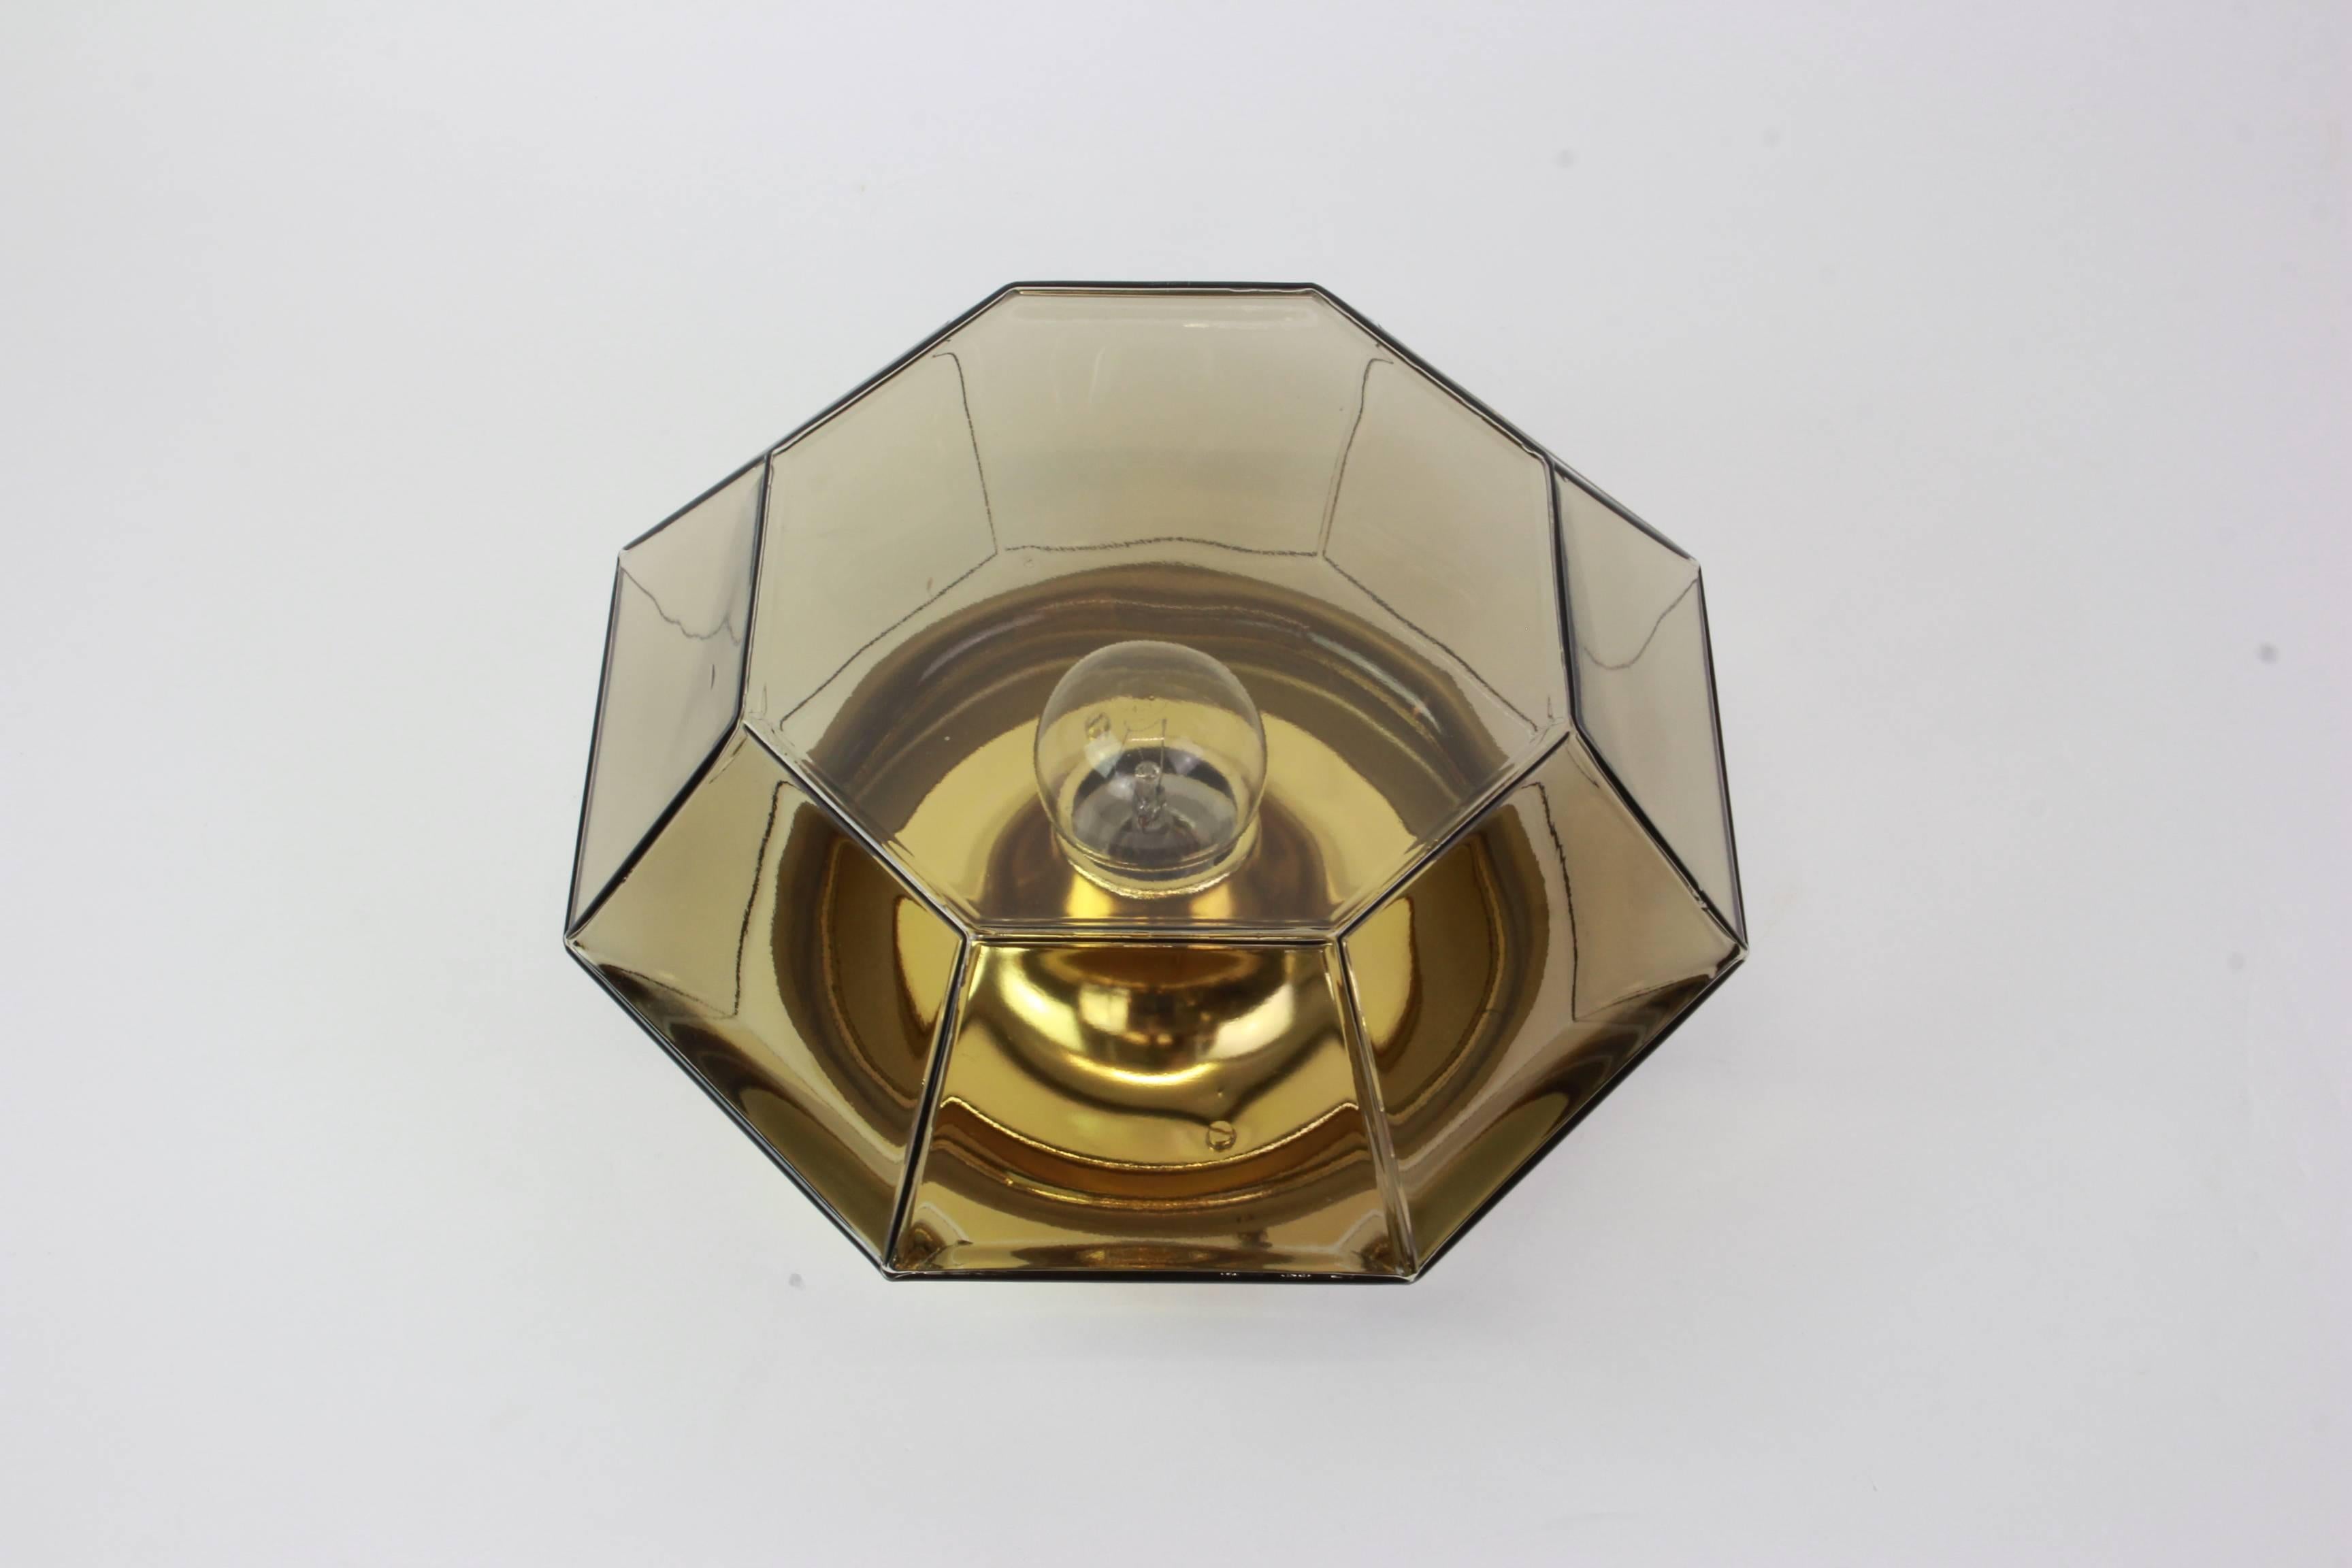 1 of 3 Minimalist iron and clear glass flush mount manufactured by Limburg Glashu¨tte Germany, circa 1960-1969. Octagonal shaped lantern and multifaceted clear glass.

High quality and in very good condition. Cleaned, well-wired and ready to use.